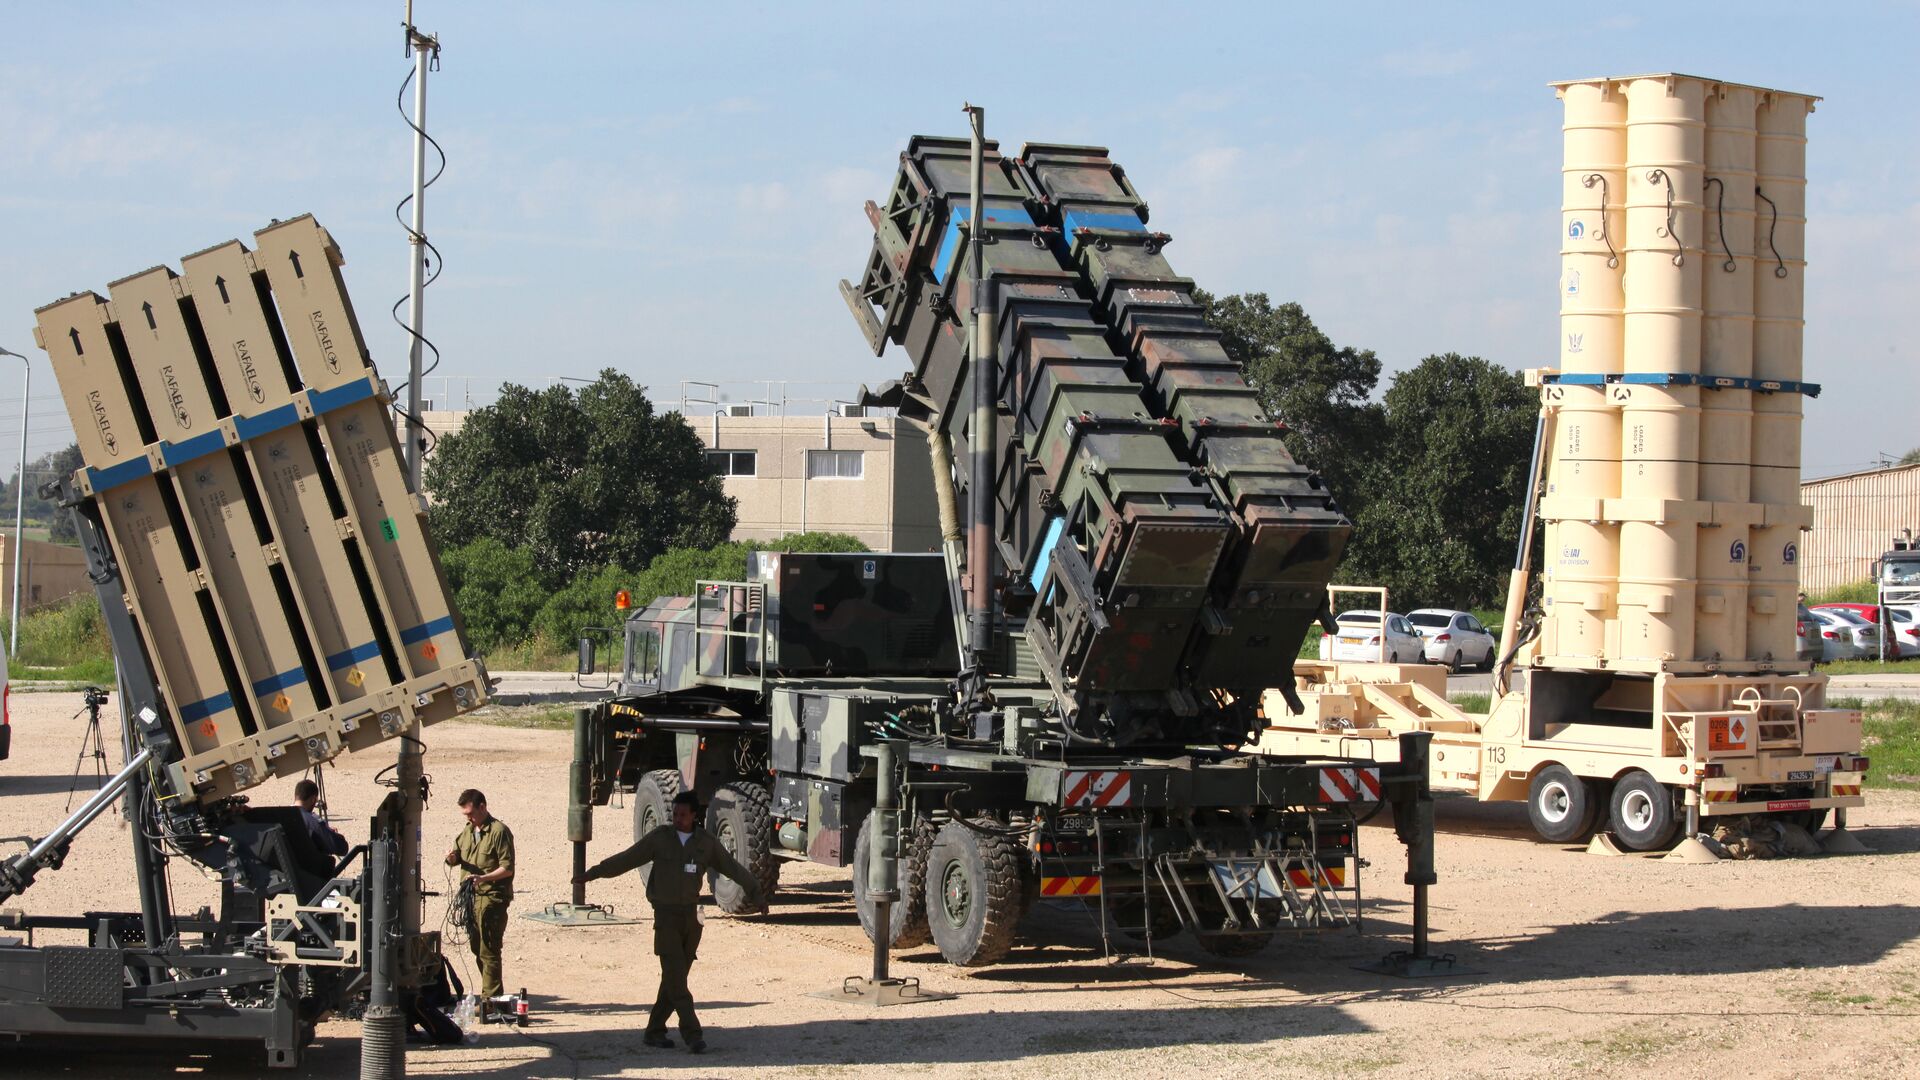 Israeli soldiers walk near an Israeli Irone Dome defence system (L), a surface-to-air missile (SAM) system, the MIM-104 Patriot (C), and an anti-ballistic missile the Arrow 3 (R) during Juniper Cobra's joint exercise press briefing at Hatzor Israeli Air Force Base in central Israel, on February 25, 2016. Juniper Cobra, is held every two years where Israel and the United States train their militaries together to prepare against possible ballistic missile attacks, as well as allowing the armies to learn to better work together. - Sputnik International, 1920, 14.03.2022